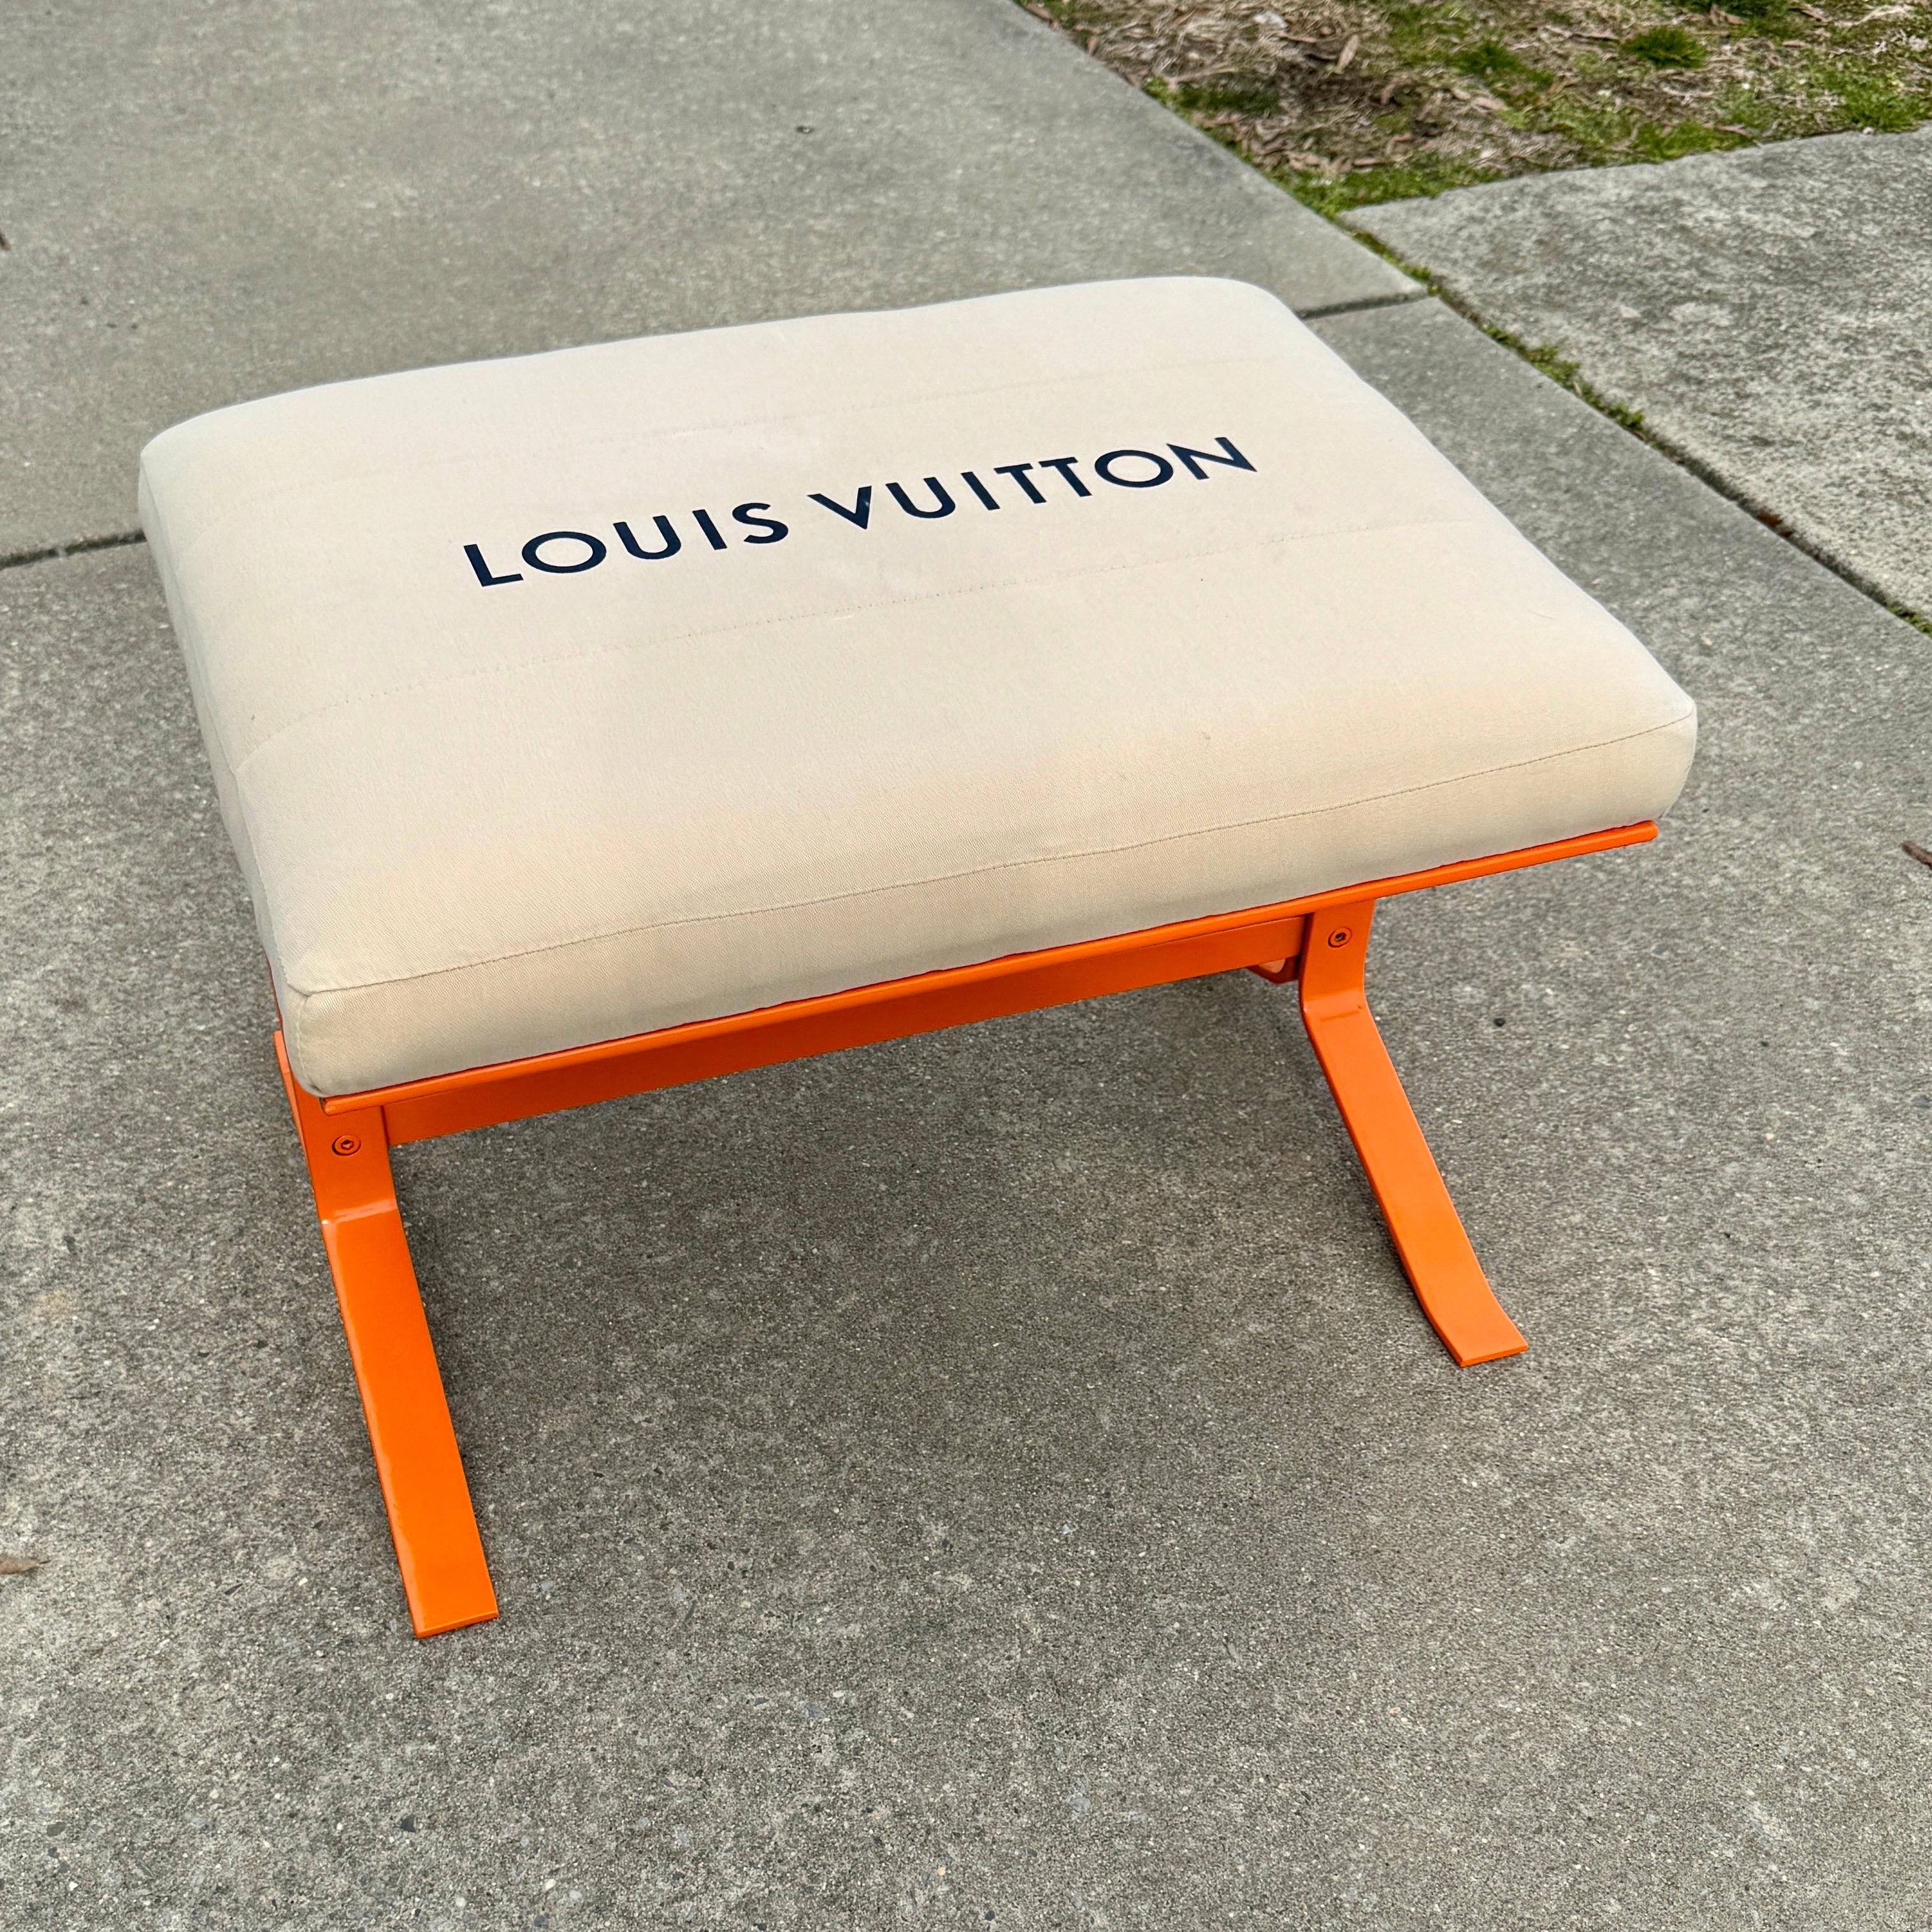 Mid-Century Modern Orange Upholstered Bench With Louis Vuitton Bag Fabric For Sale